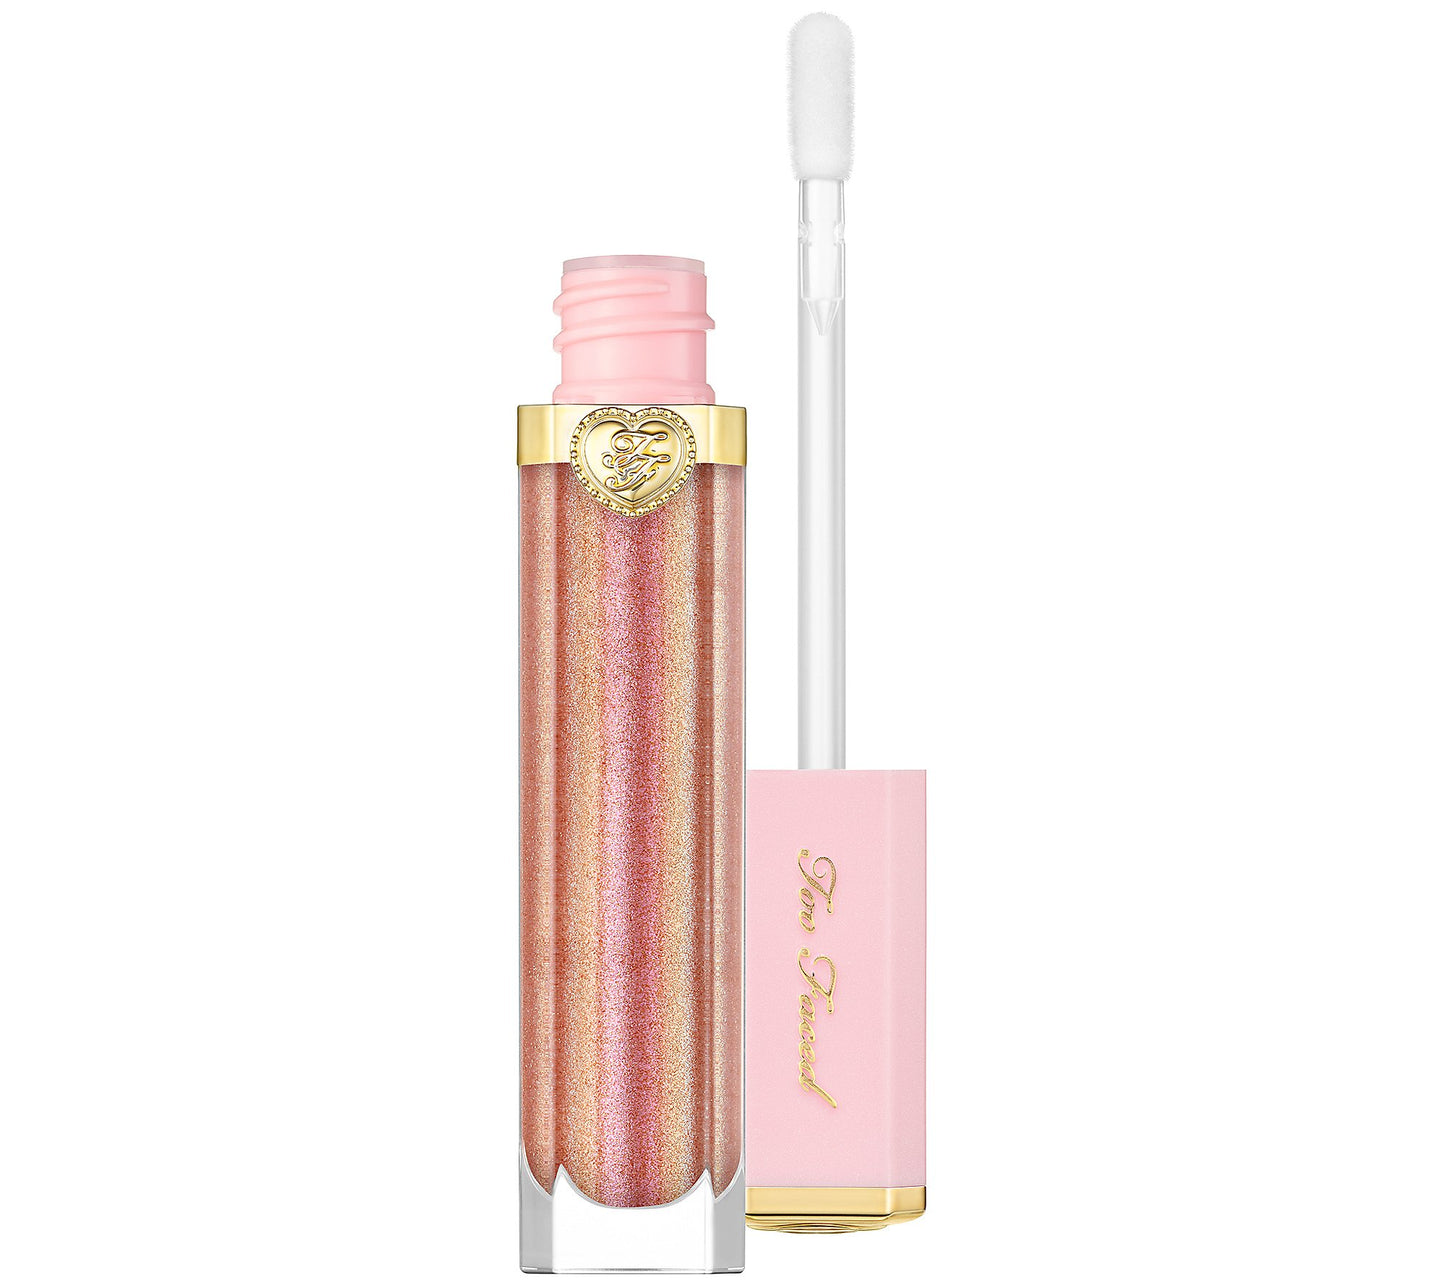 Too Faced Rich & Dazzling High Shine Sparkling Lip Gloss | Sunset Crush